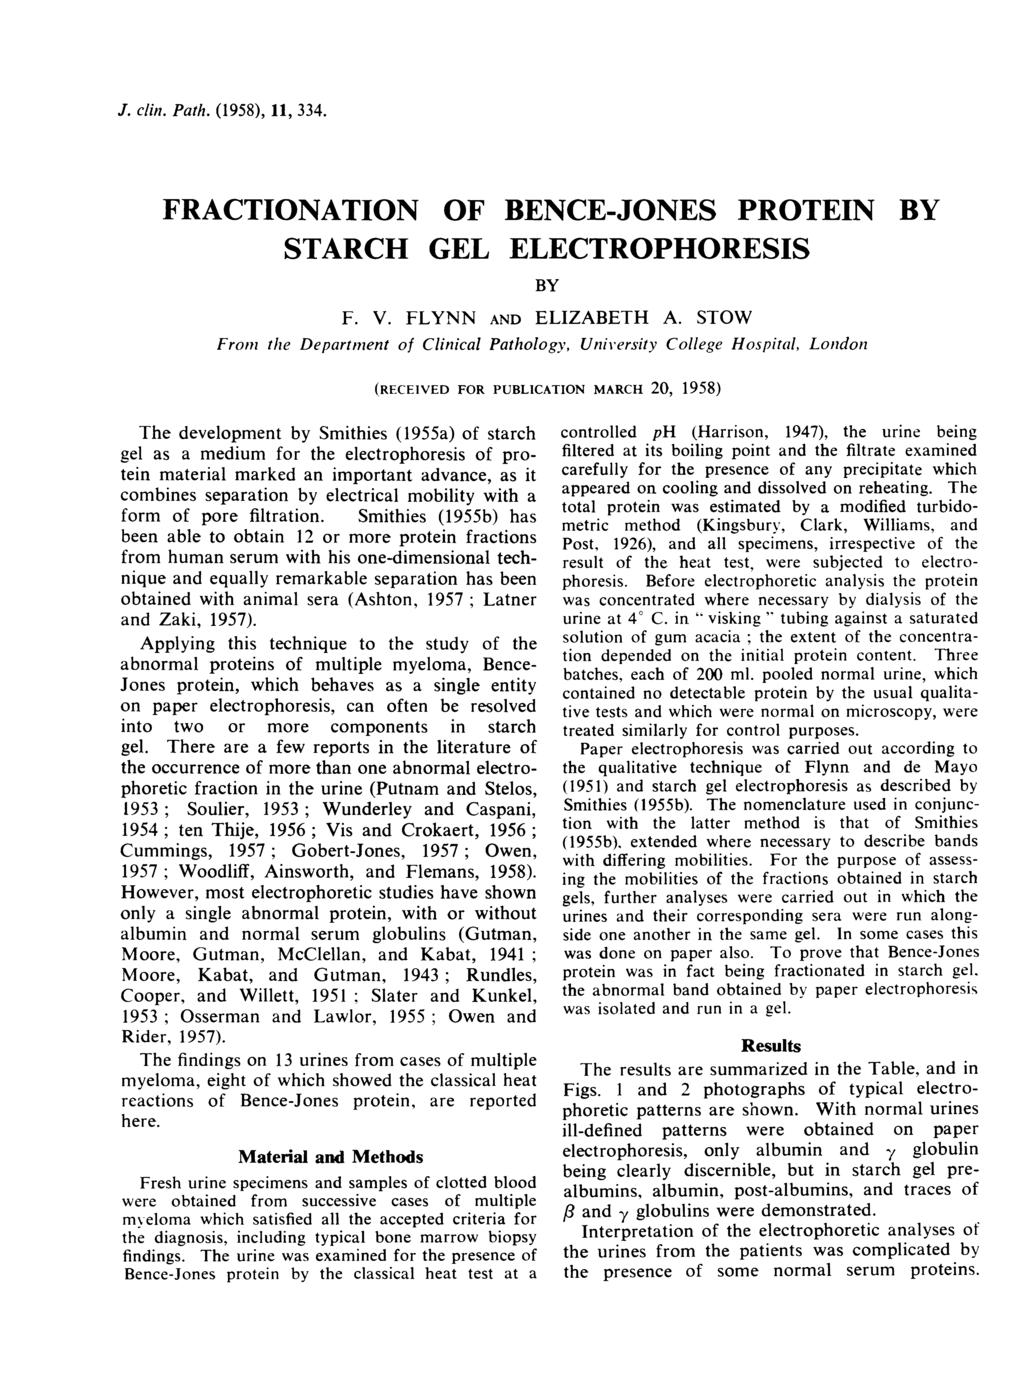 J. clin. Path. (1958), 11, 334. FRACTIONATION OF BENCE-JONES PROTEIN BY STARCH GEL ELECTROPHORESIS BY F. V. FLYNN AND ELIZABETH A.